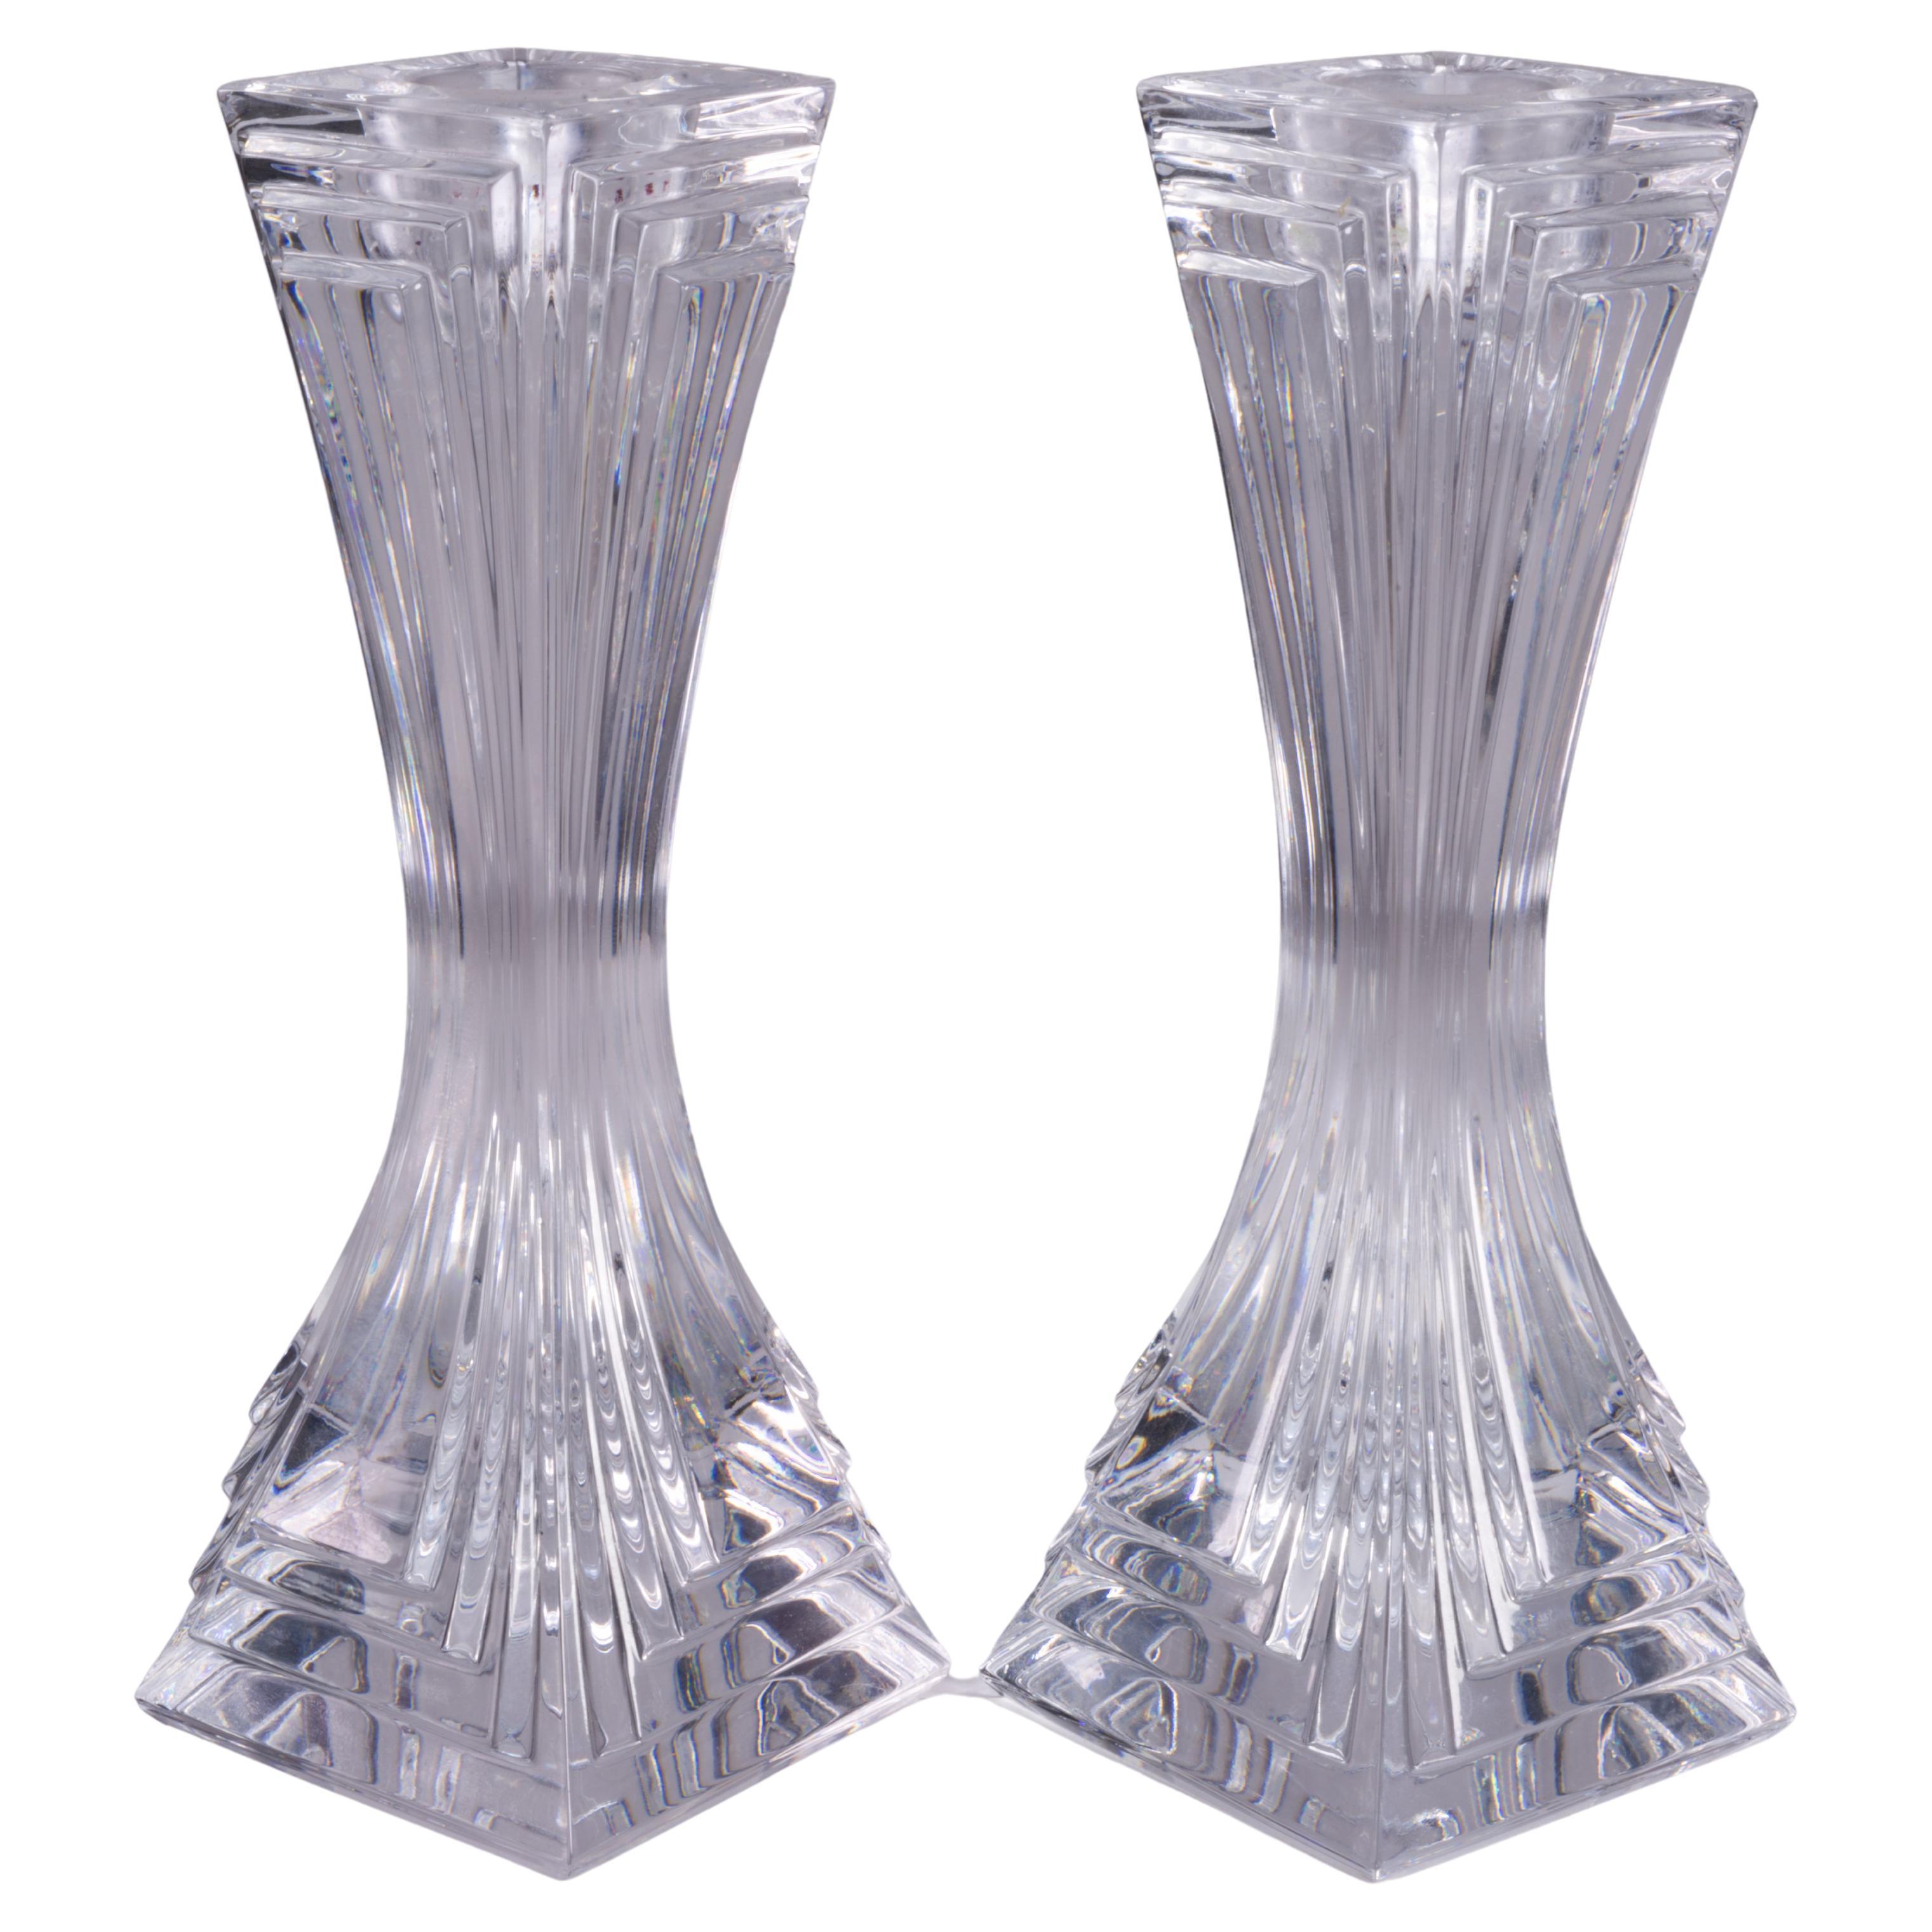 Art Deco Revival Pair of Crystal Candlesticks